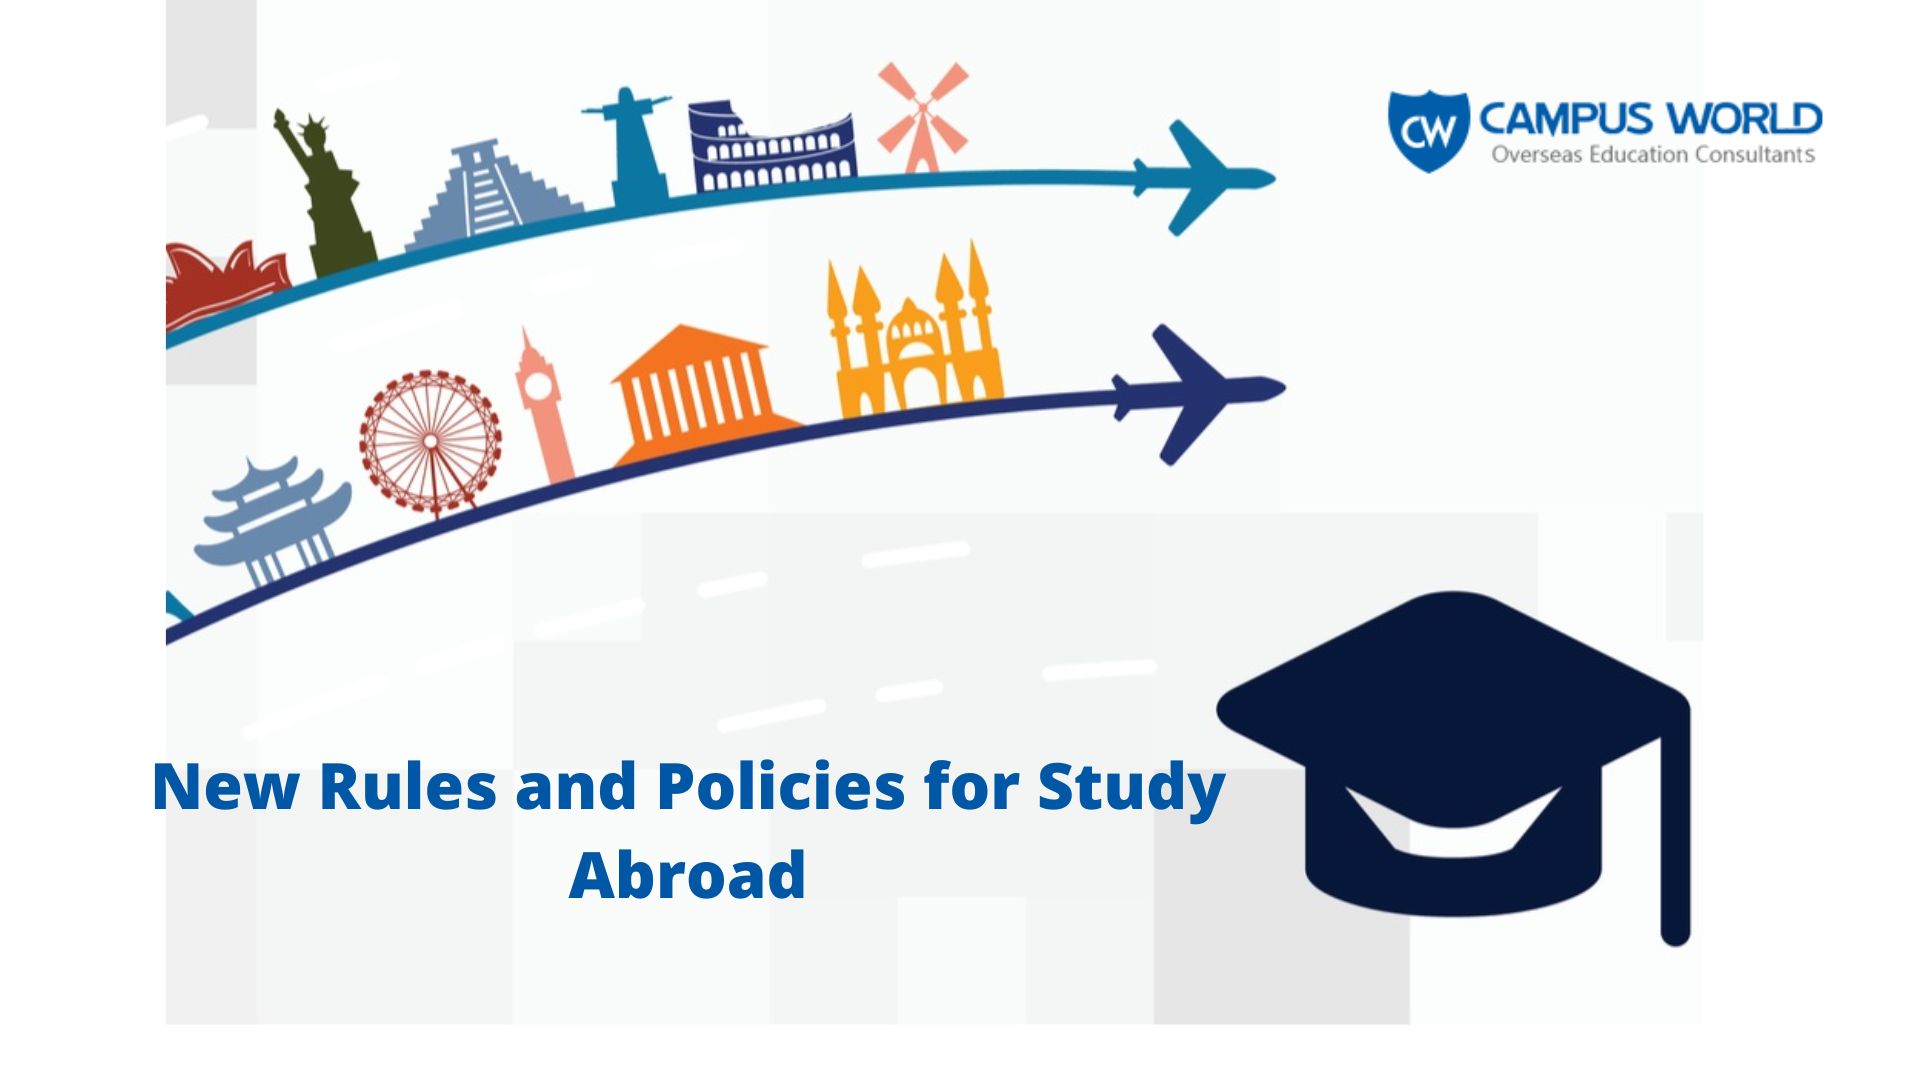 New Rules and Policies for Study Abroad